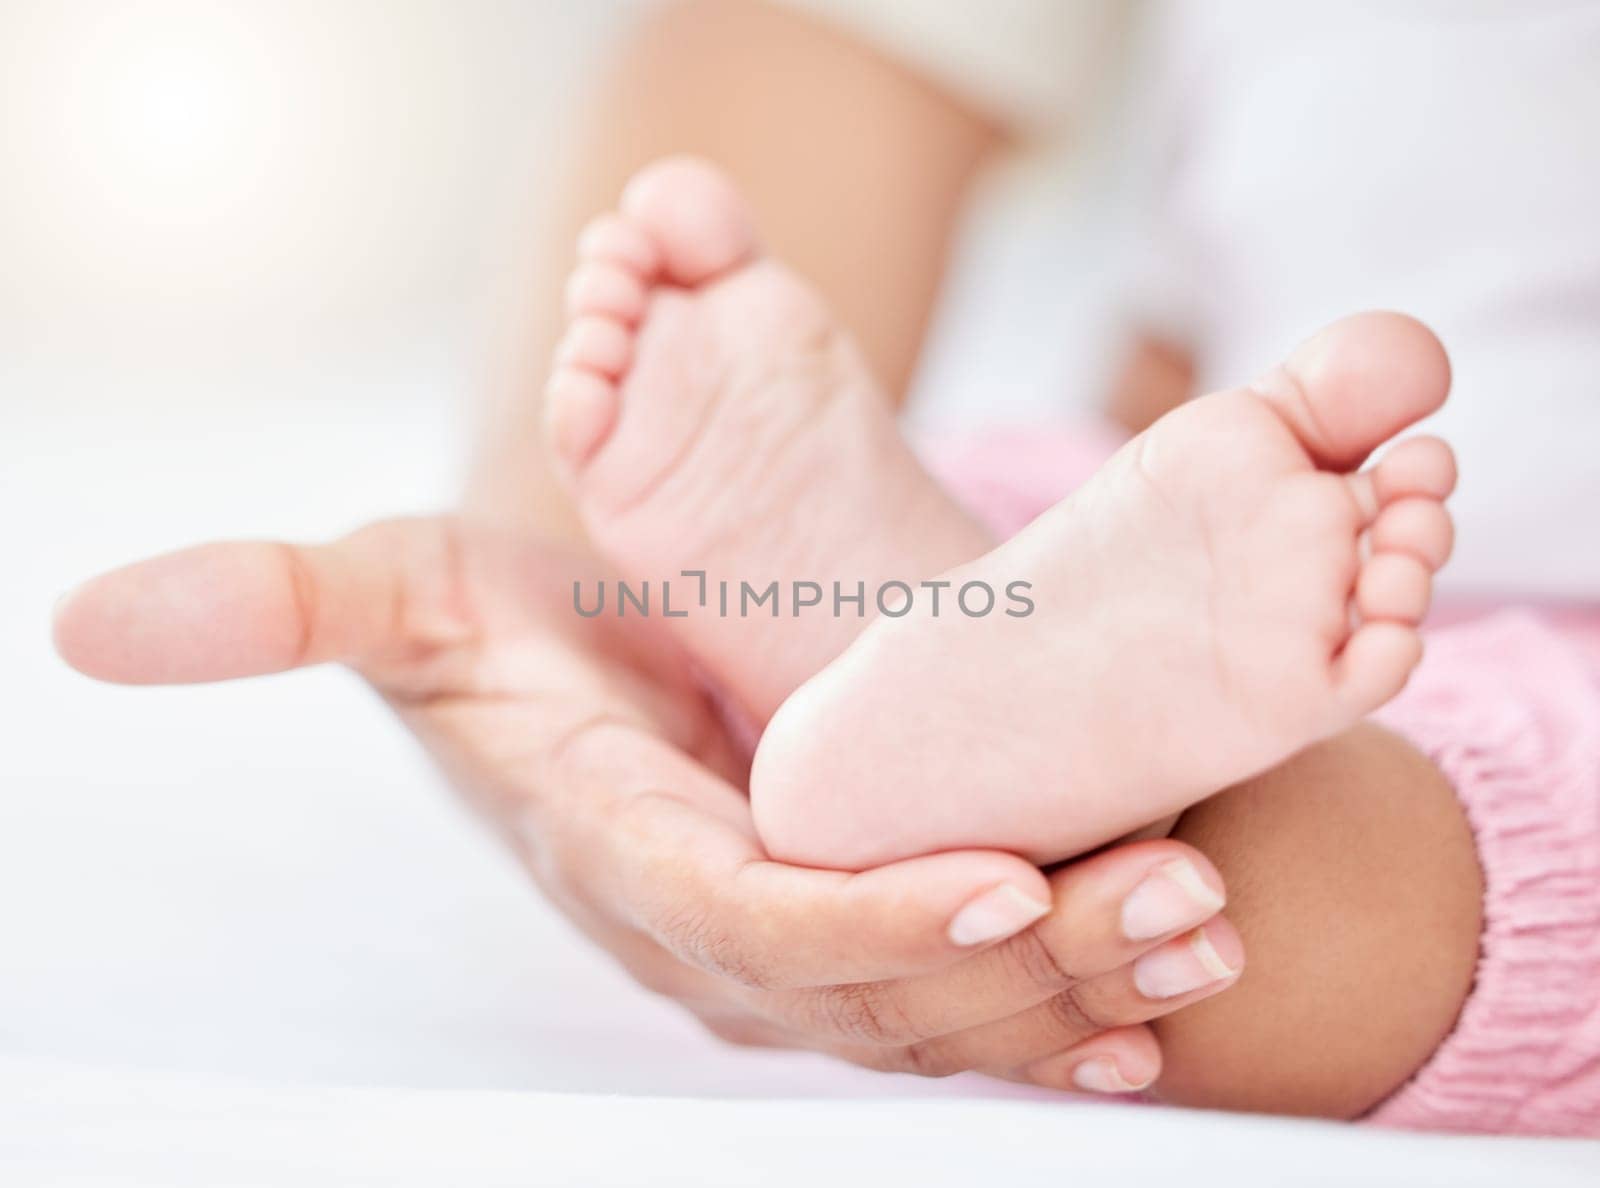 Family, love and the feet of a baby in the hands of a parent closeup in the bedroom of their home together. Kids, care or wellness and an infant child on a bed in an apartment with an adult person.